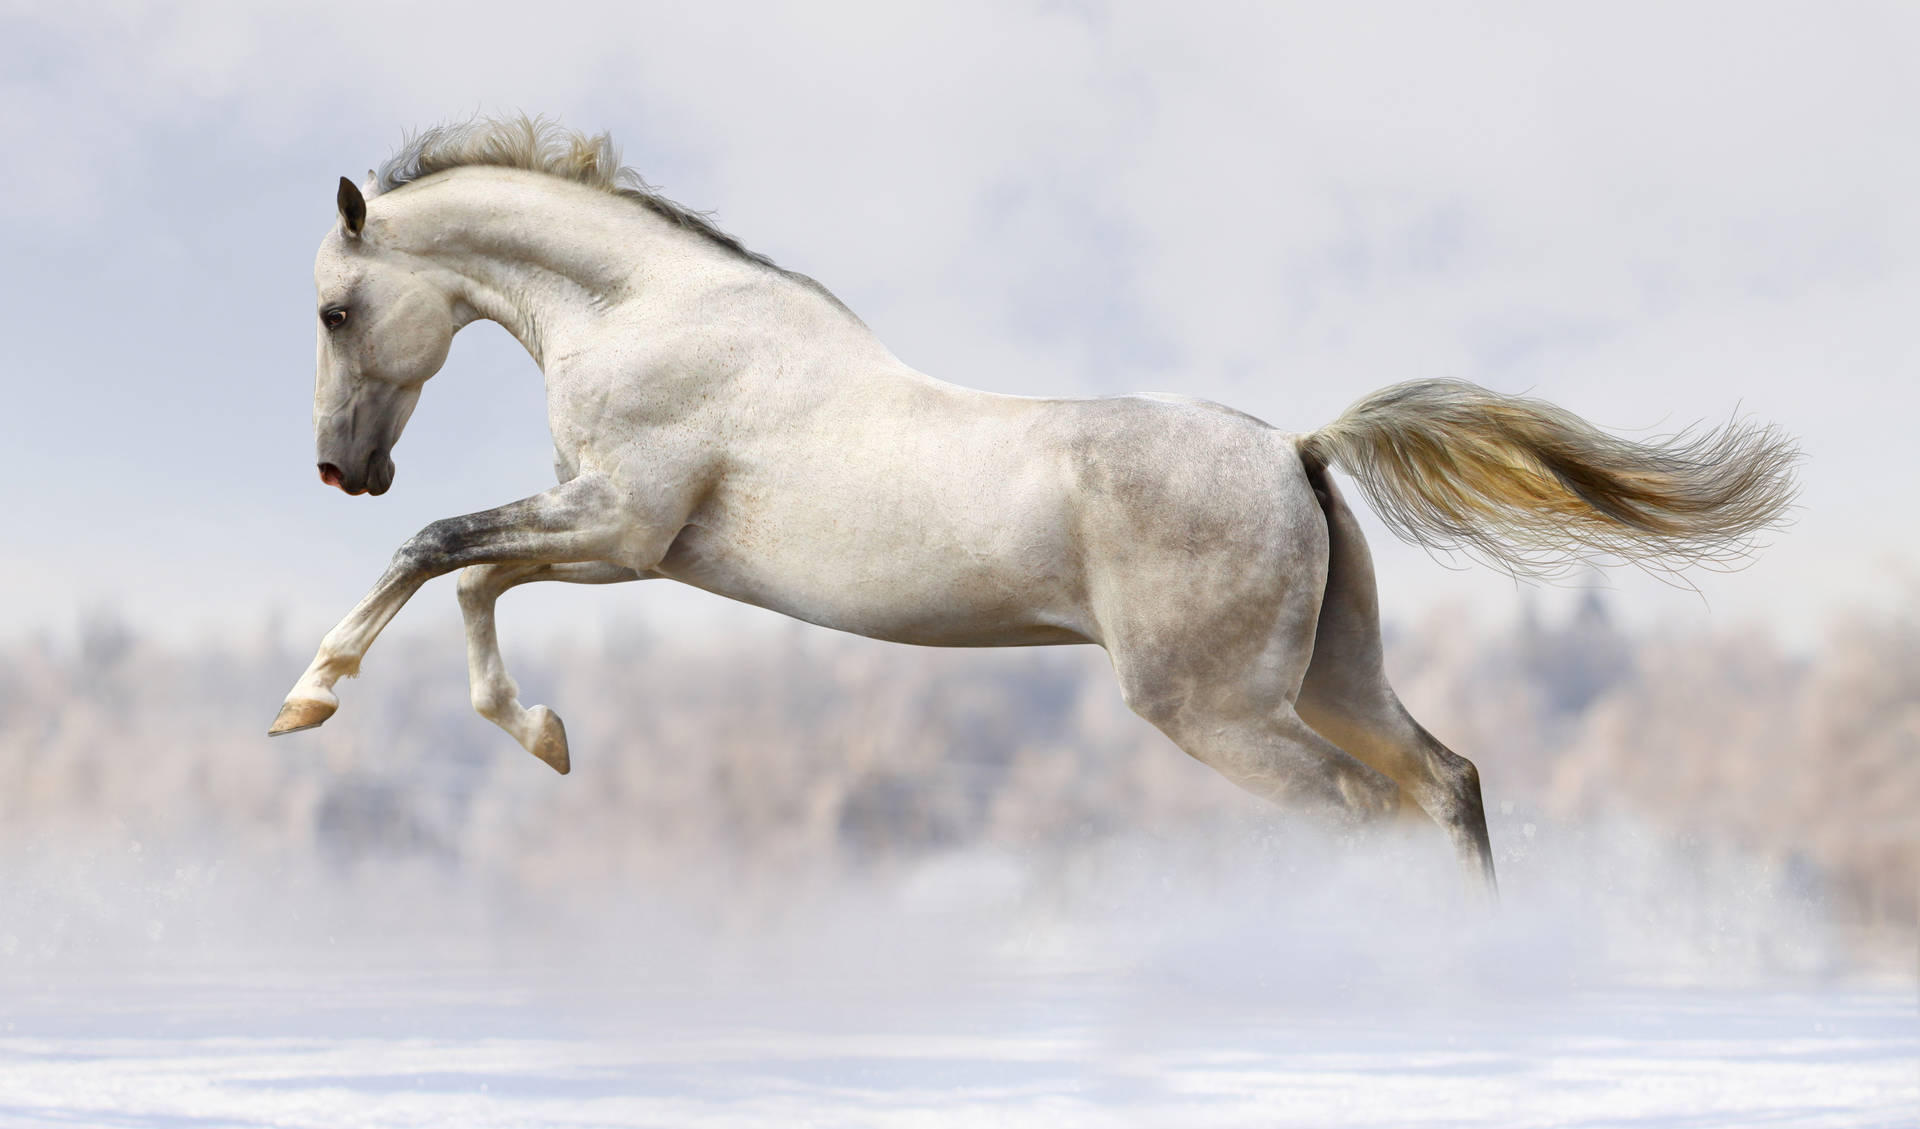 Magnificent White Running Horse